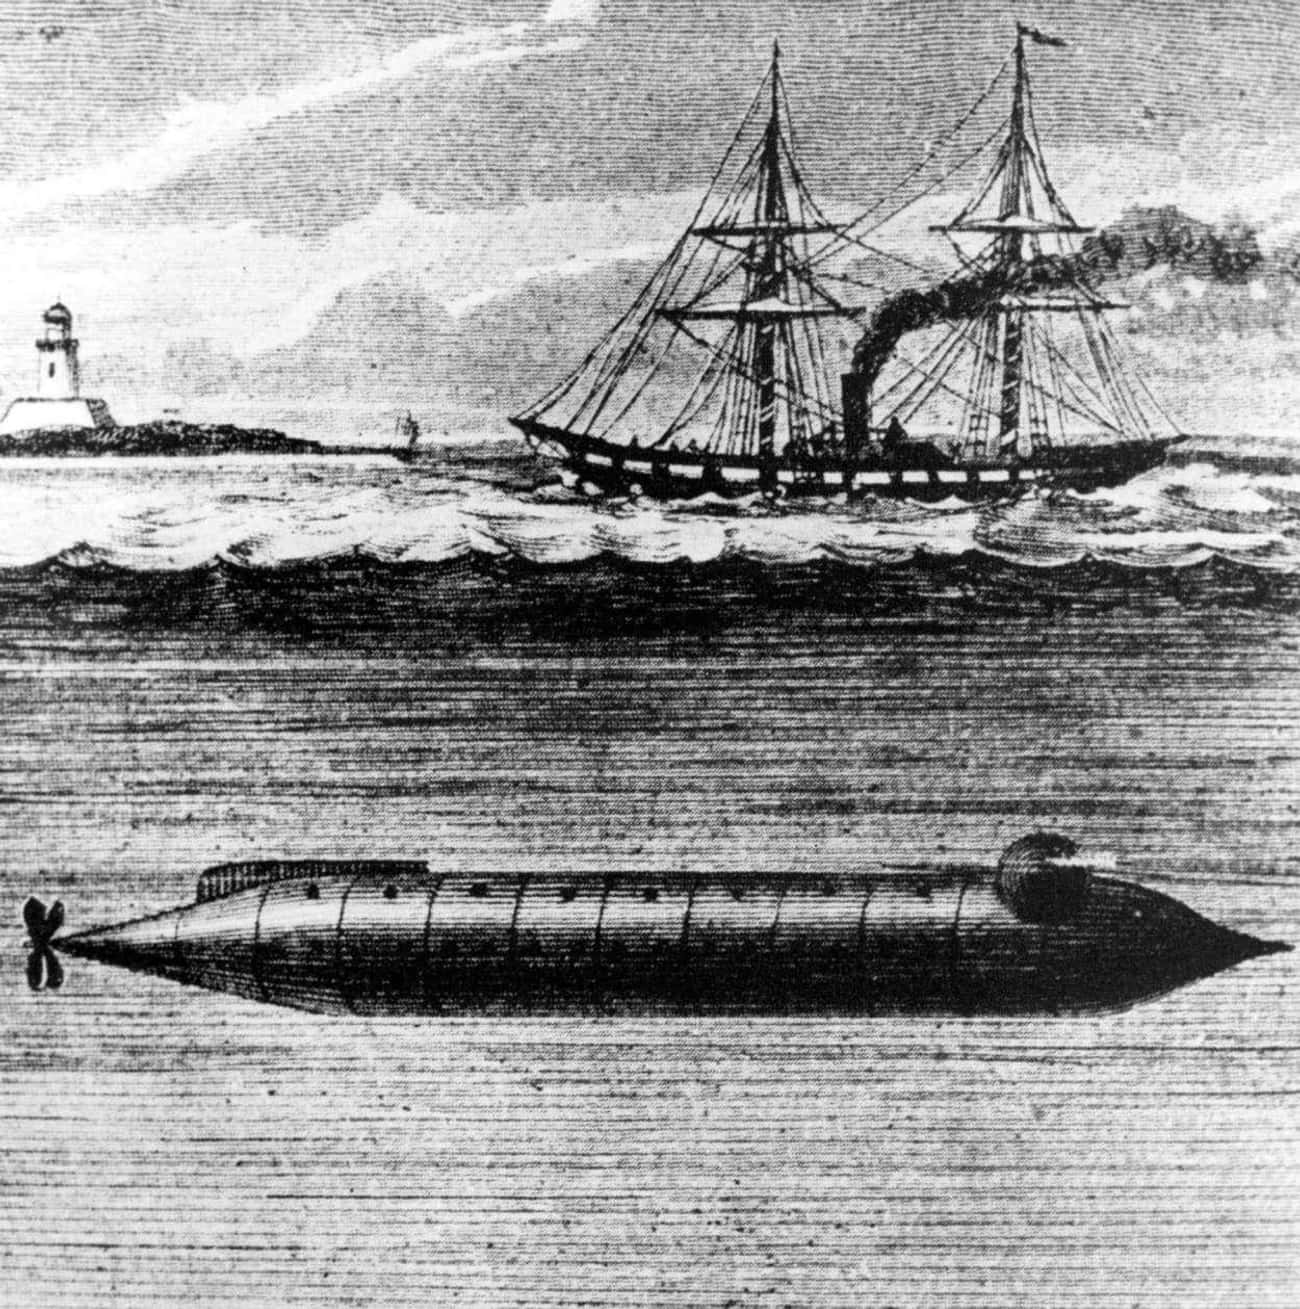 Did The Union Have A Submarine Too?